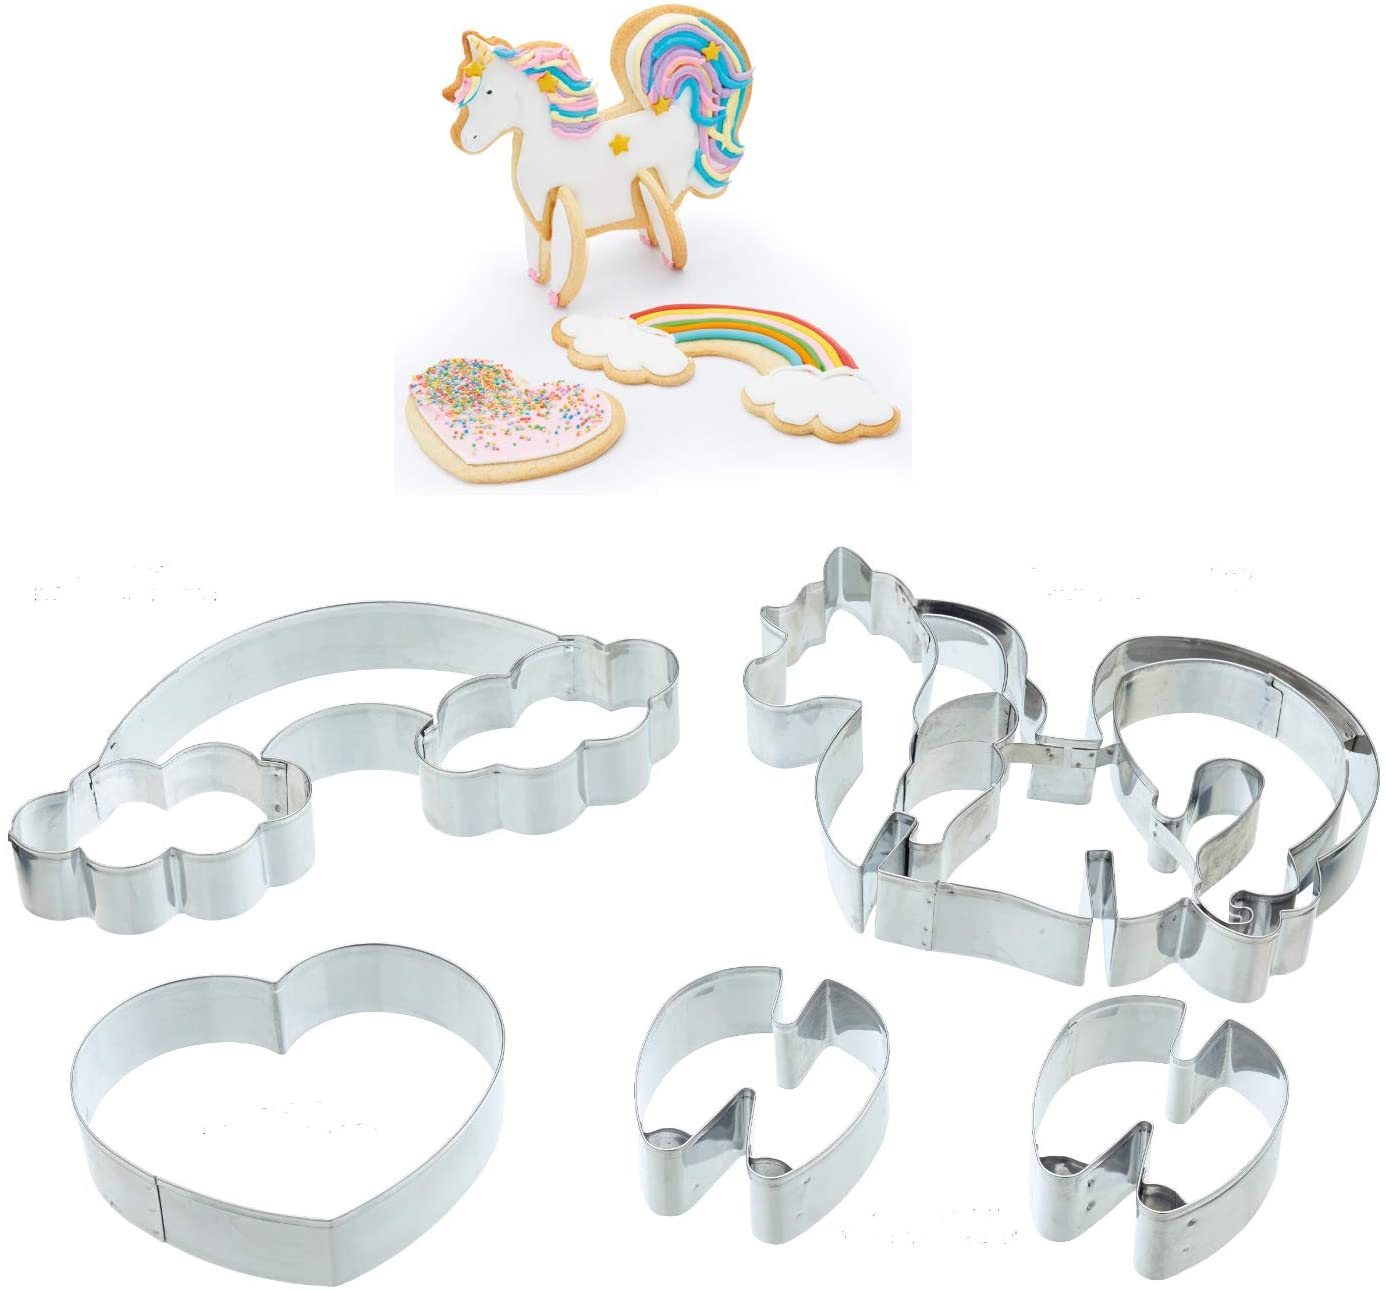 KitchenCraft Sweetly Does It 3D Unicorn Cookie Cutters (5-Piece)